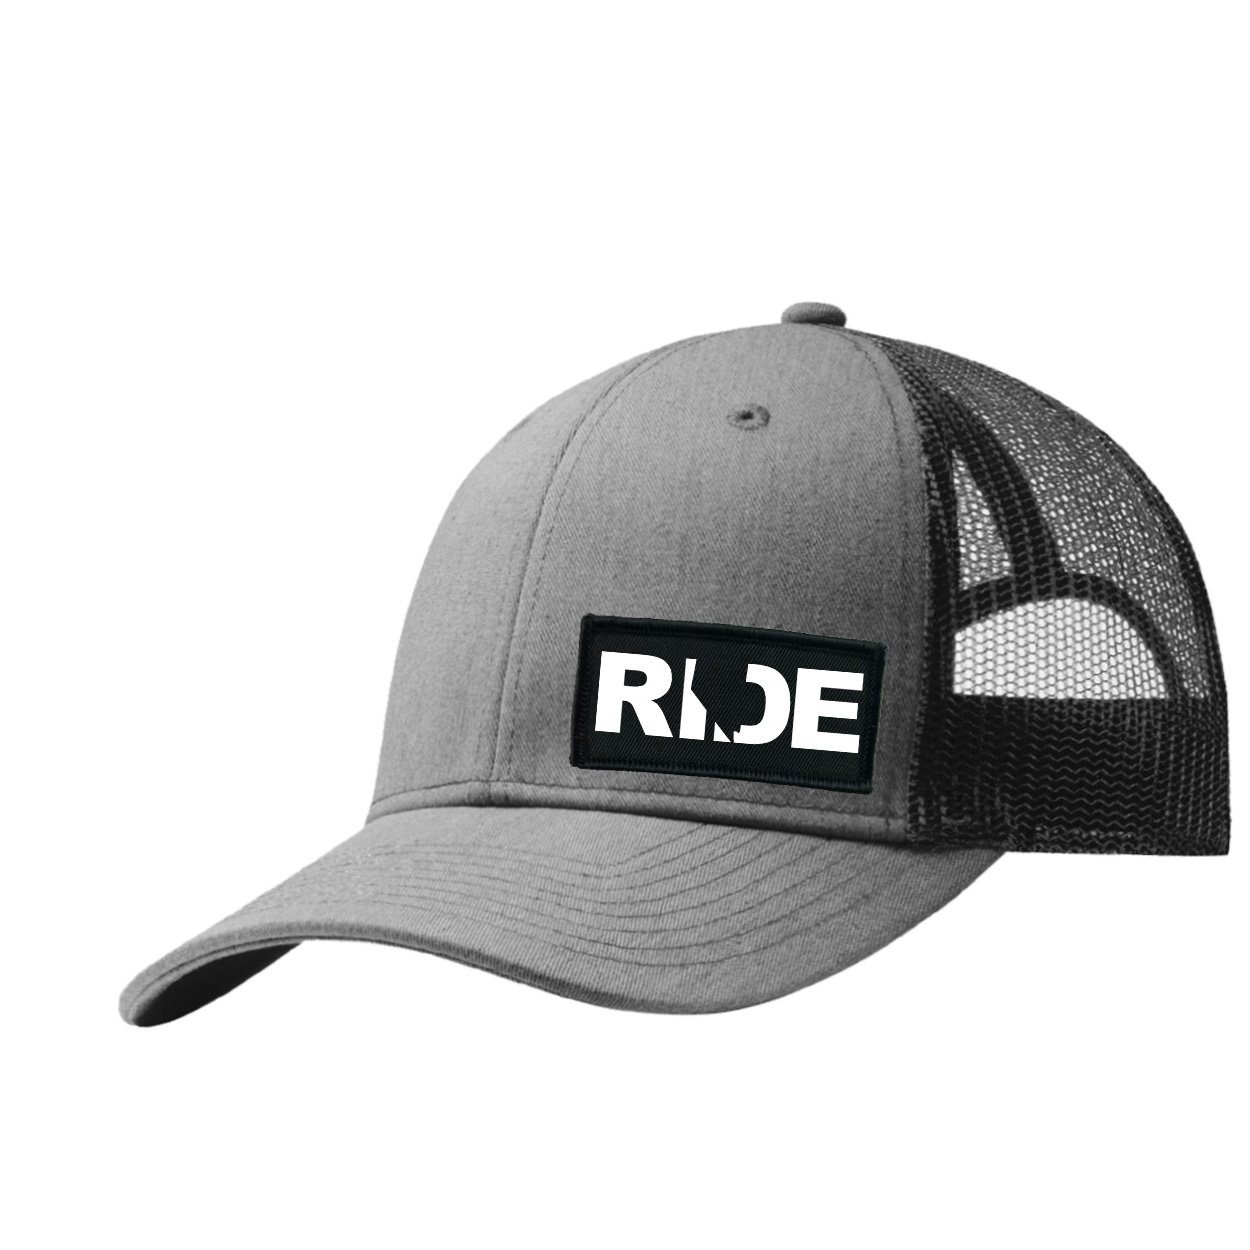 Ride Nevada Night Out Woven Patch Snapback Trucker Hat Heather Gray/Black (White Logo)